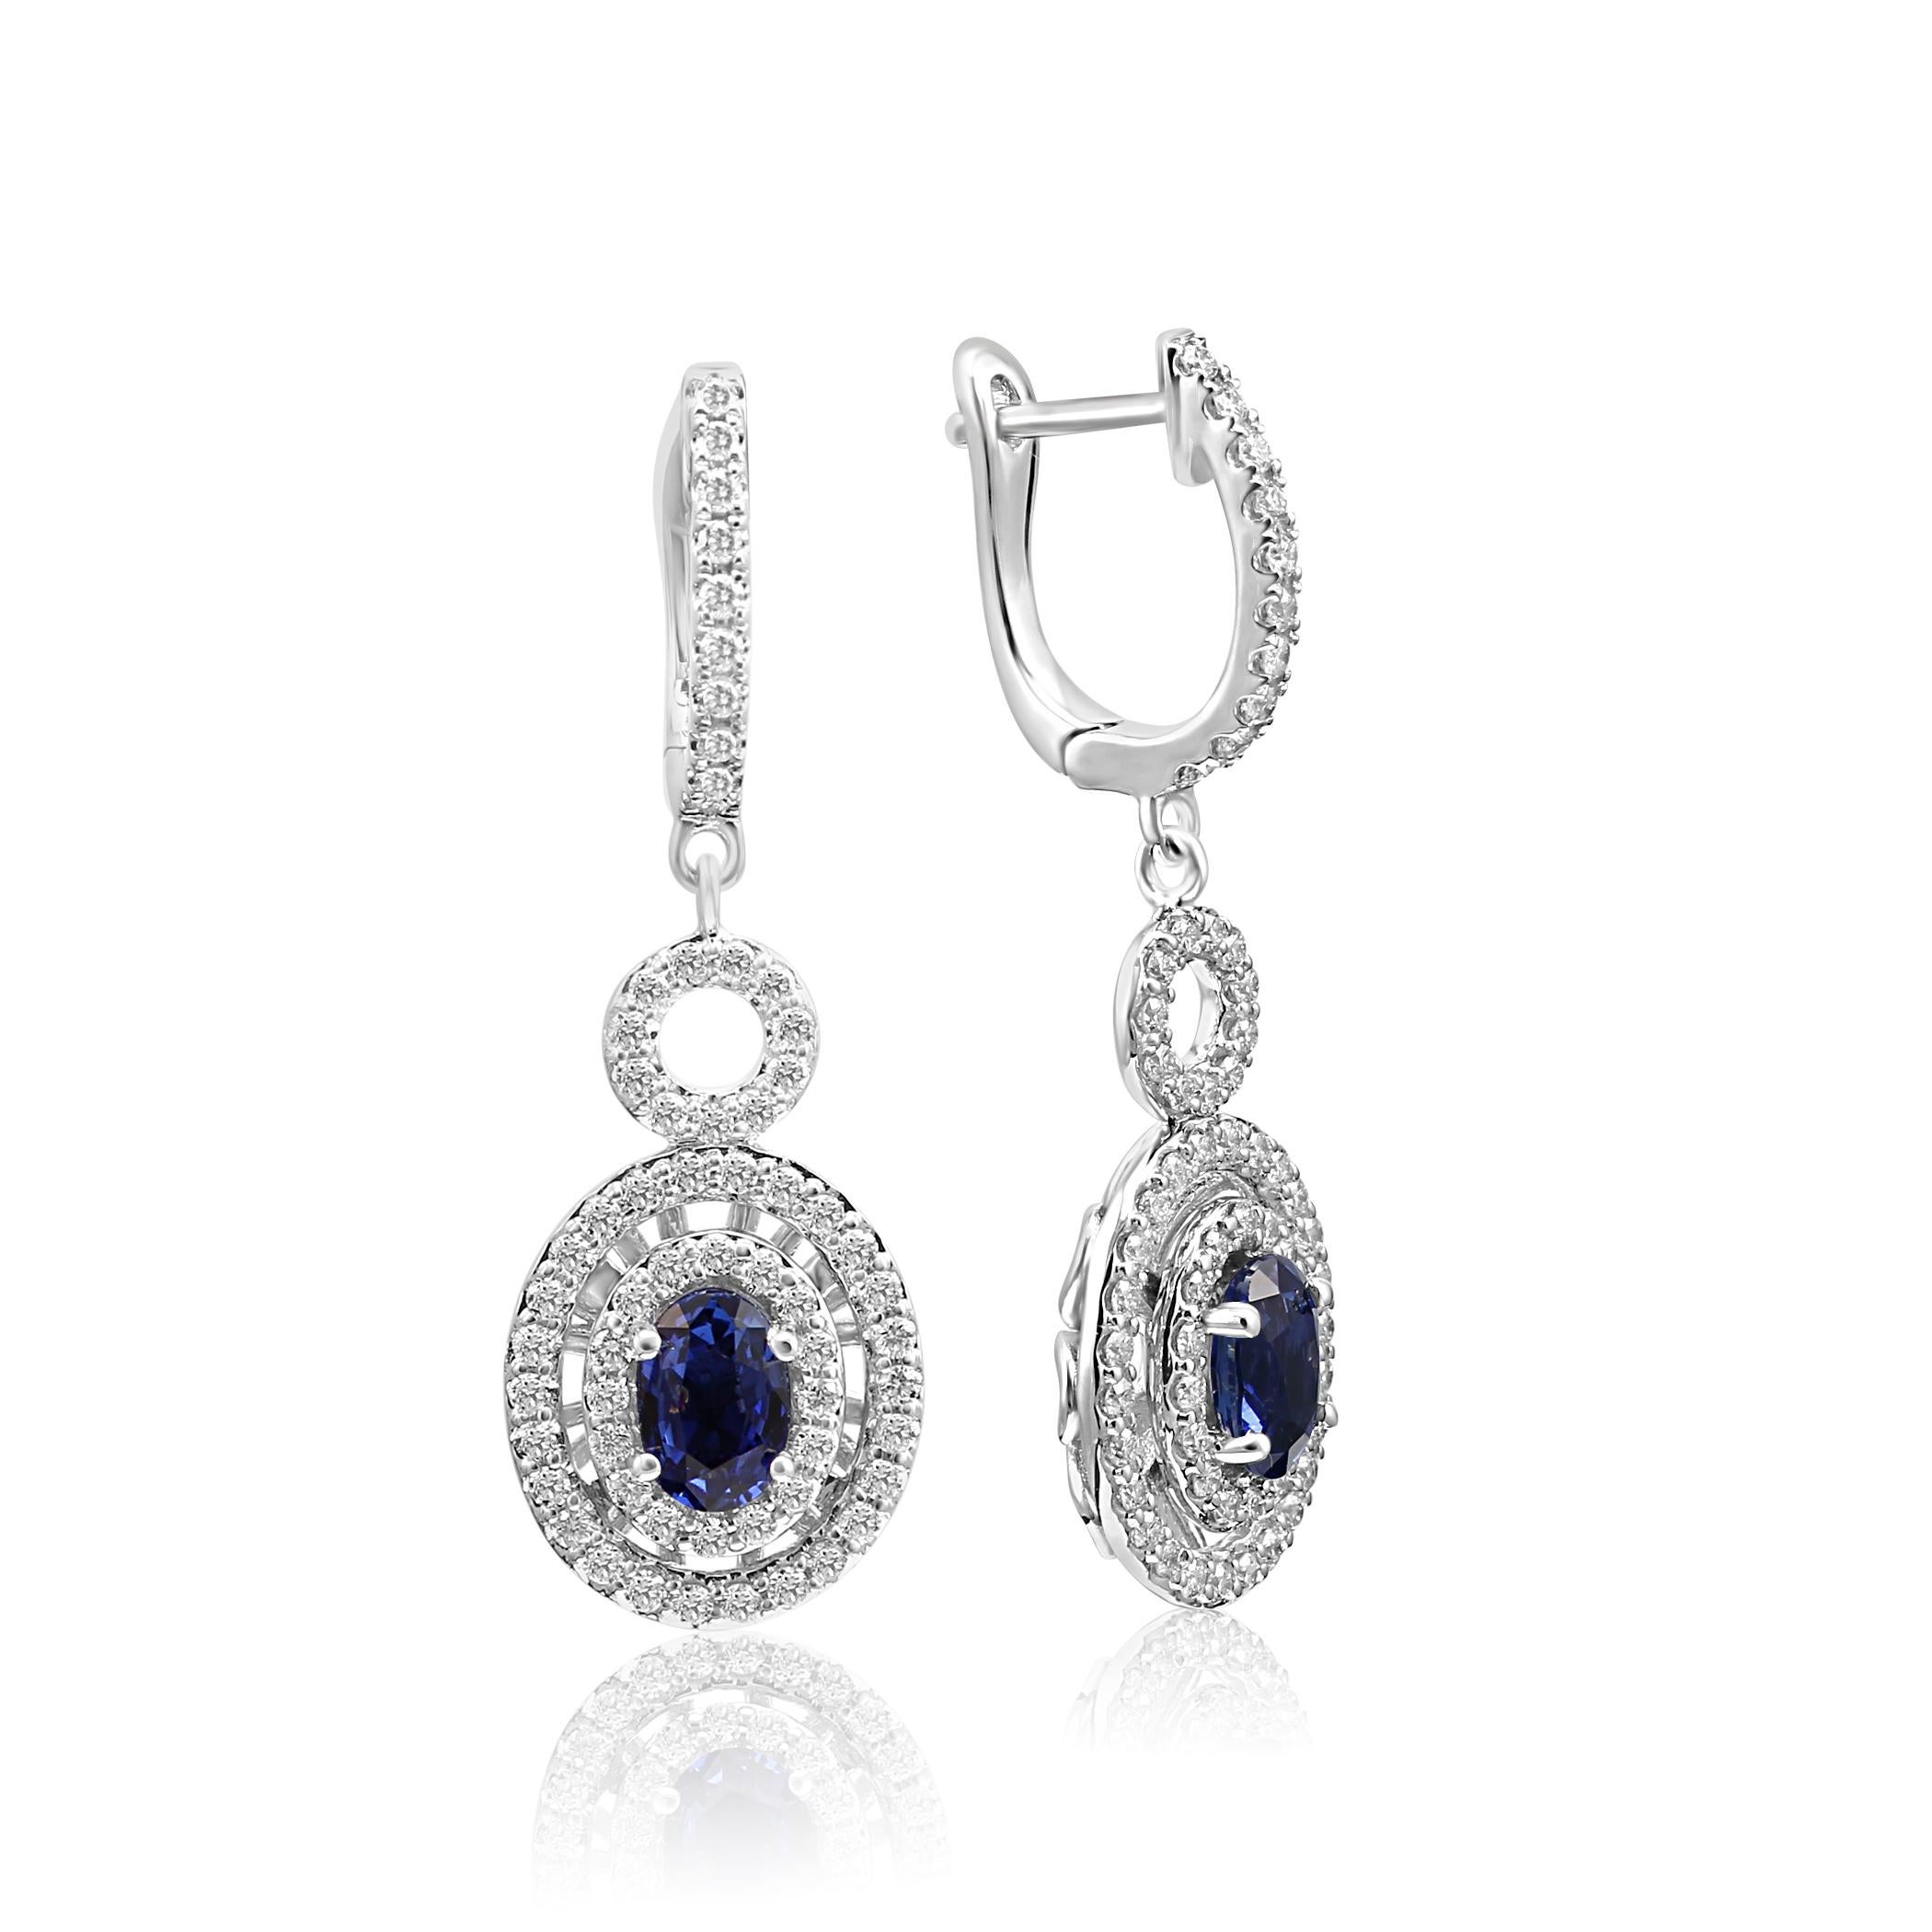 2 Blue Sapphire Oval 1.30 Carat Encircled in Double Halo of White G-H Color VS-SI Clarity Round Diamonds 0.80 Carat in 14K White Gold Dangle Drop Fashion Clip-On Earring.

Total Weight 2.10 Carat

Style available in different price ranges. Prices